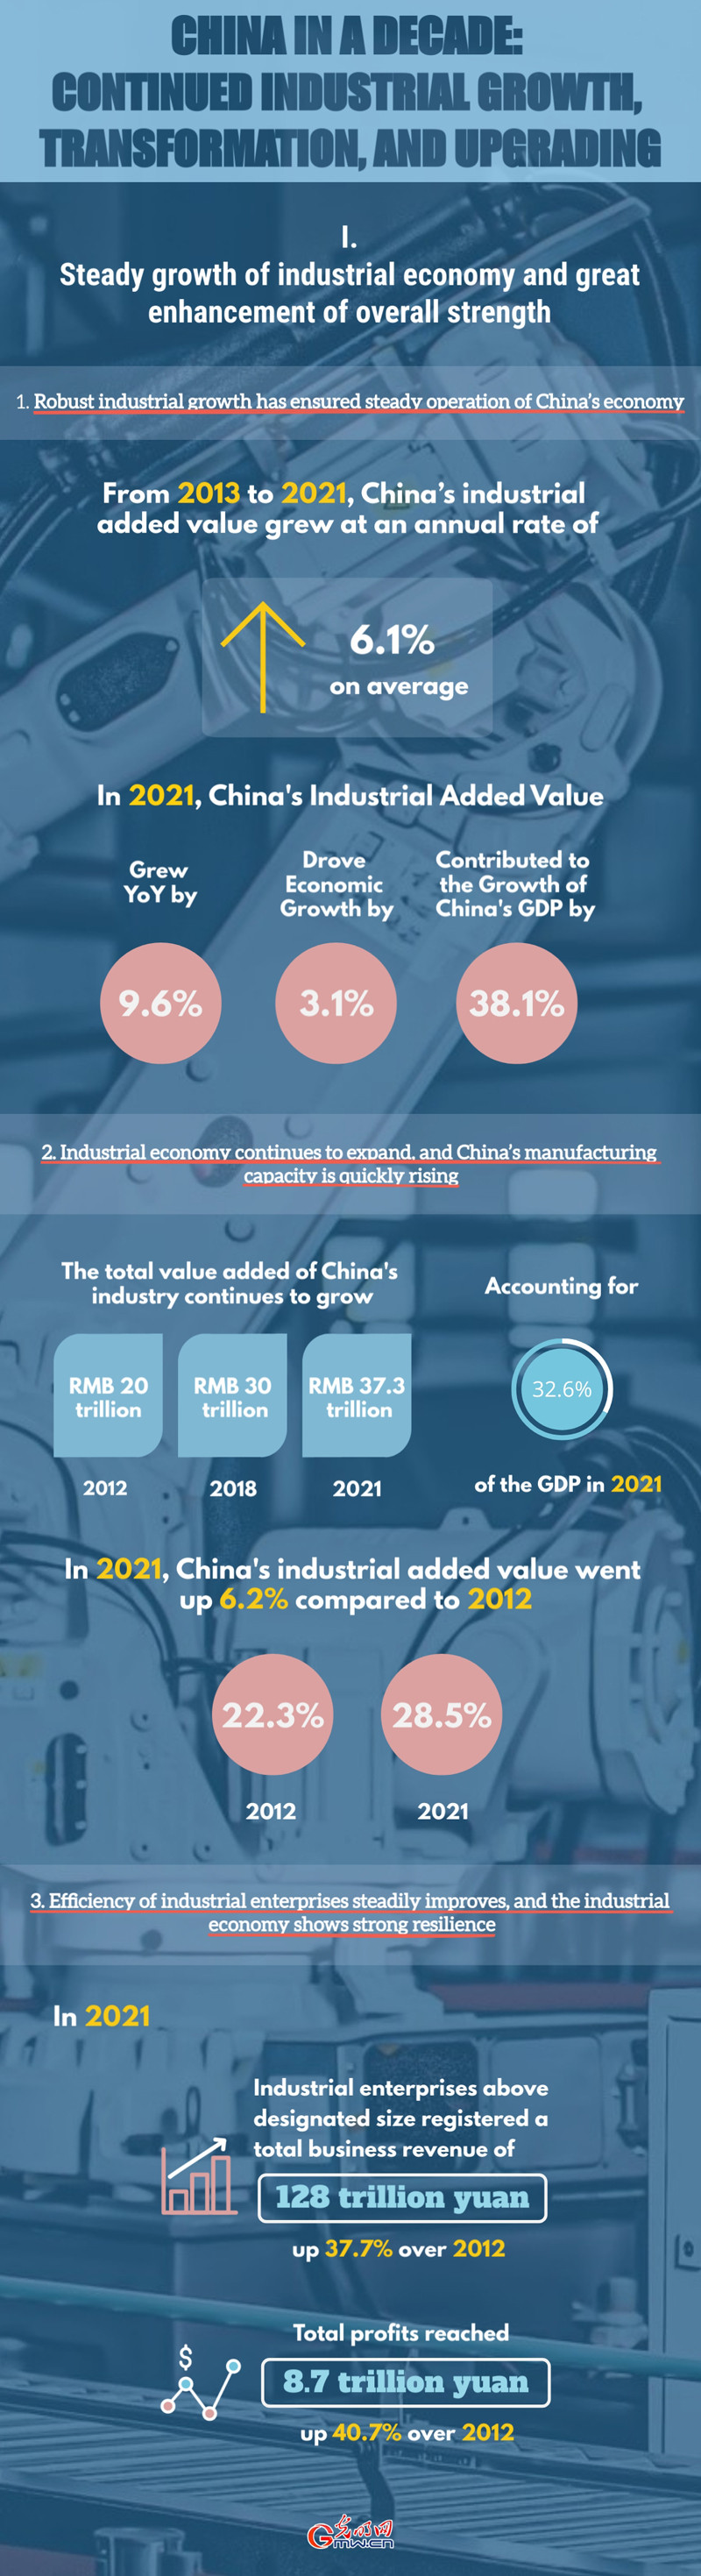 China in a Decade: Continued industrial growth, transformation and upgrading